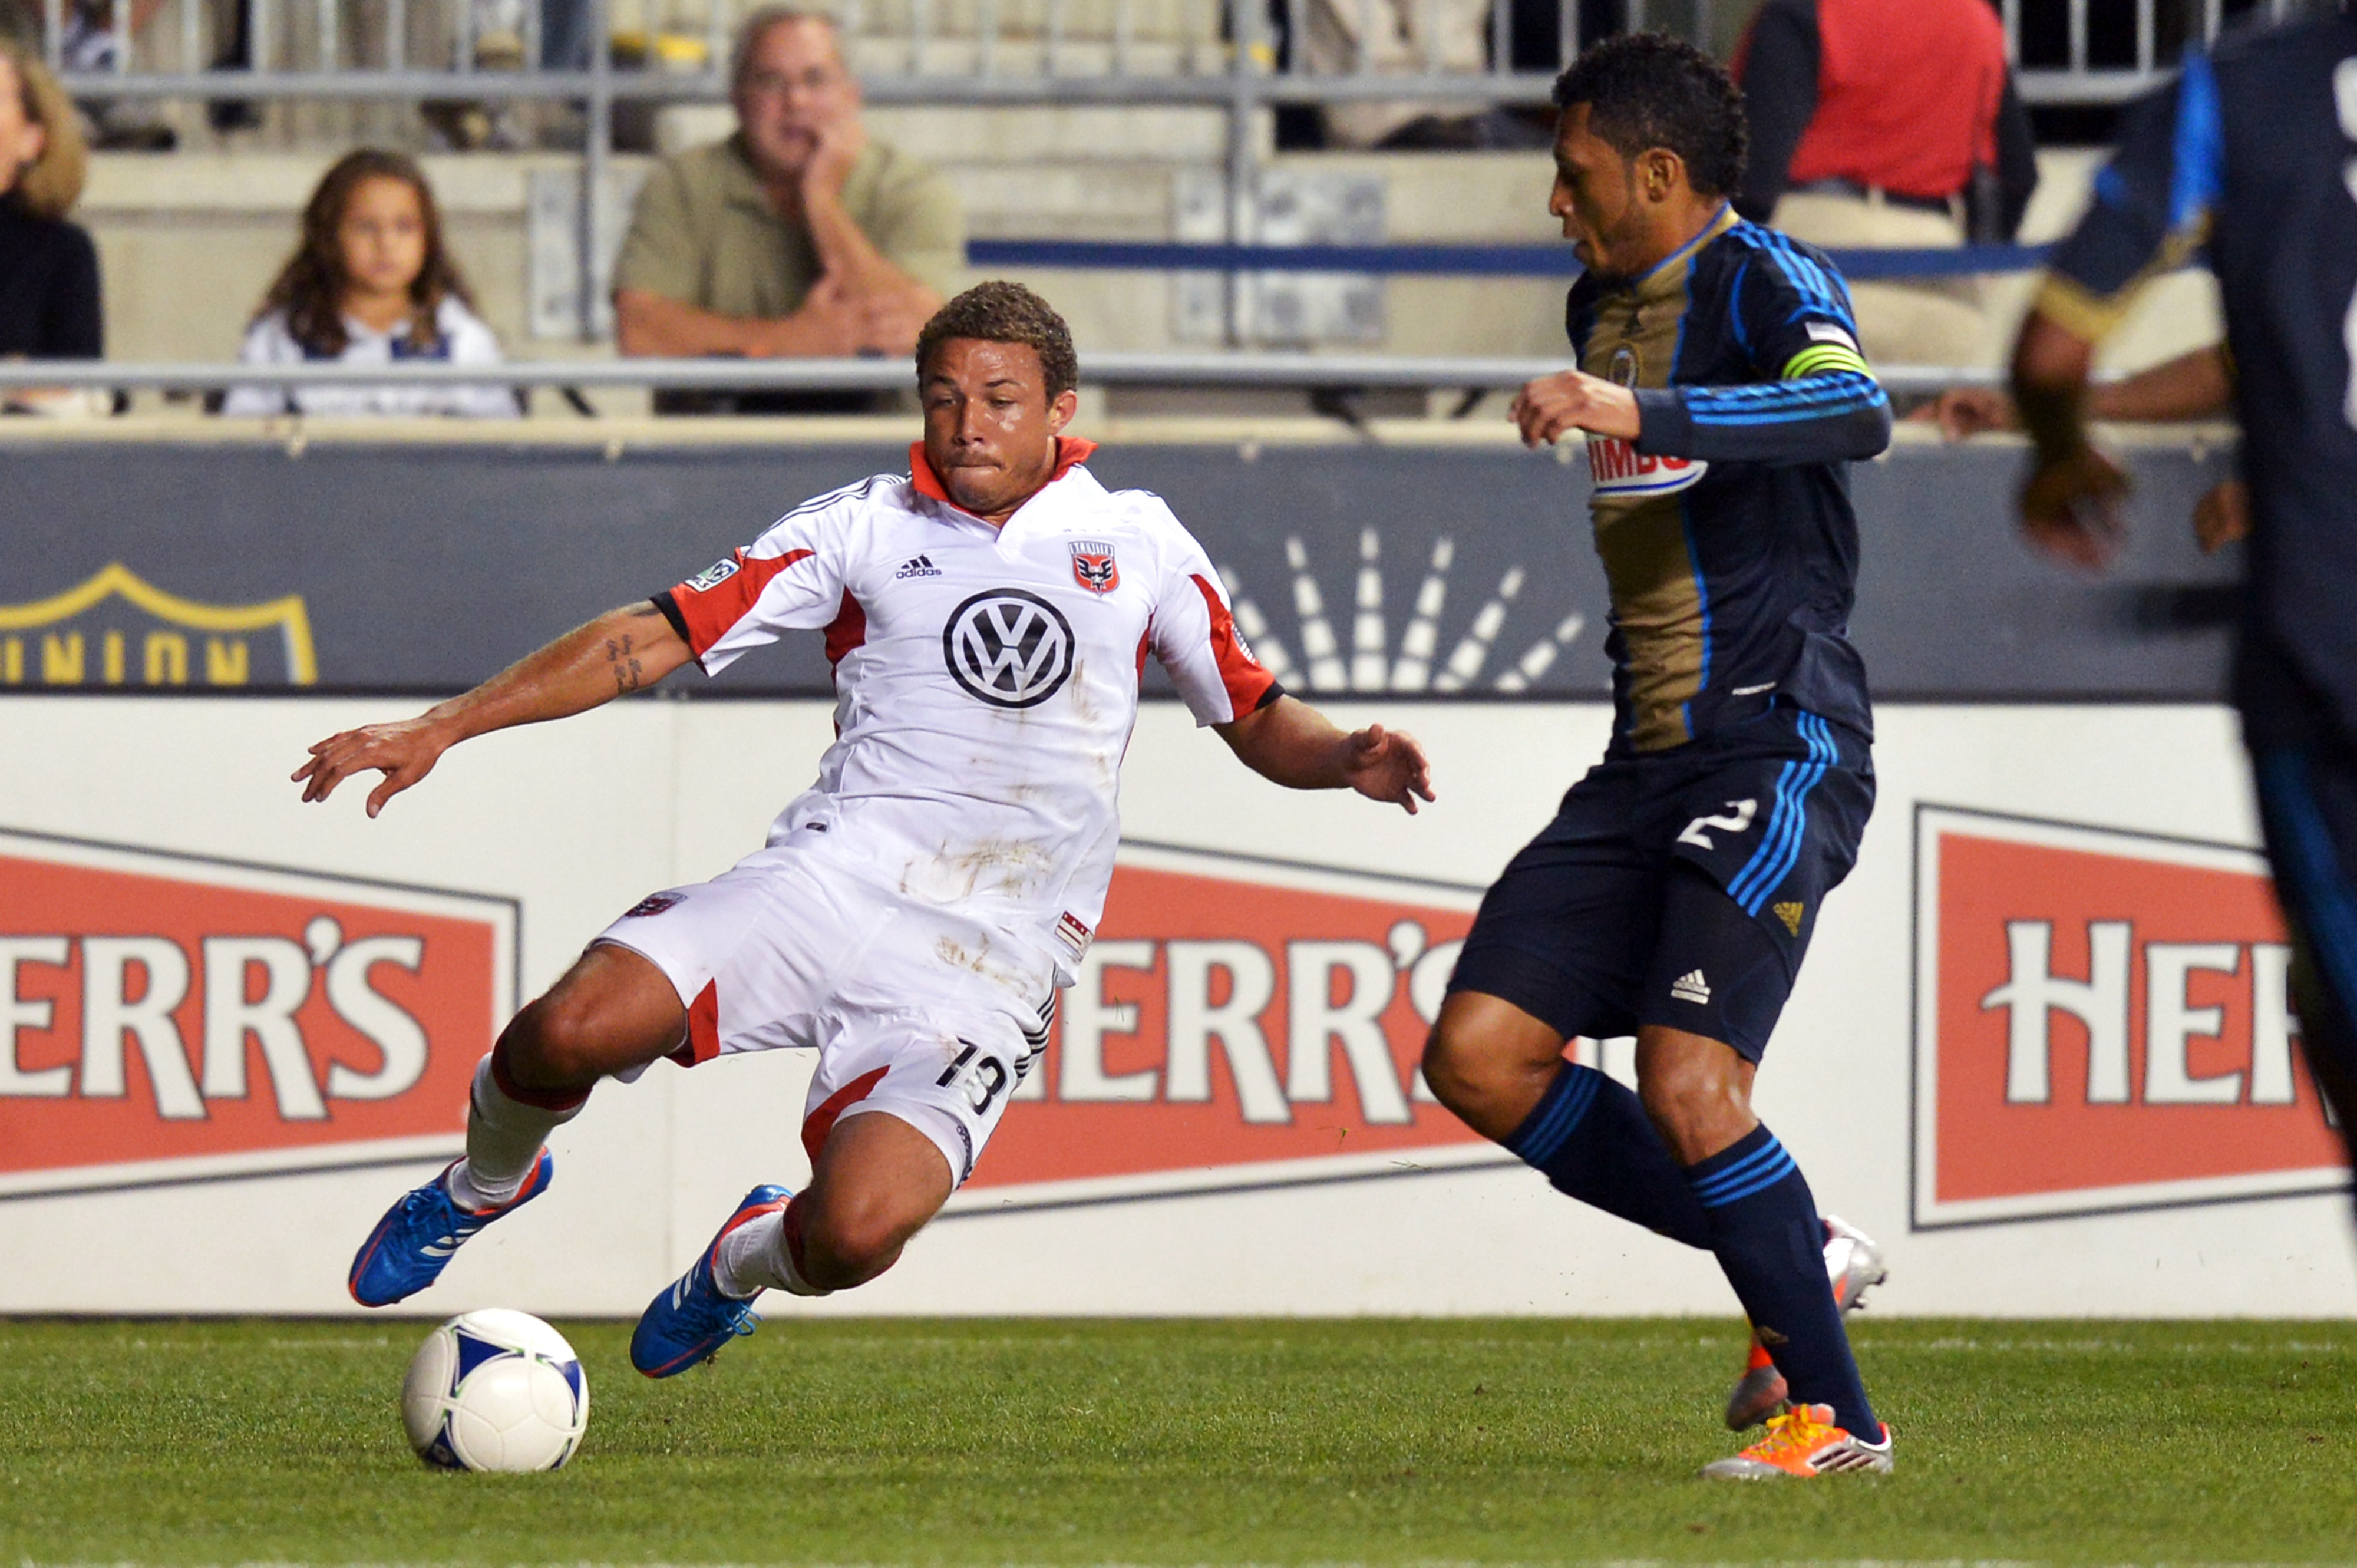 CHESTER, PA - SEPTEMBER 20: Nick DeLeon #18 of the D.C. United slides for the ball in from of Carlos Valdes #2 of the Philadelphia Union at PPL Park on September 20, 2012 in Chester, Pennsylvania. (Photo by Drew Hallowell/Getty Images)